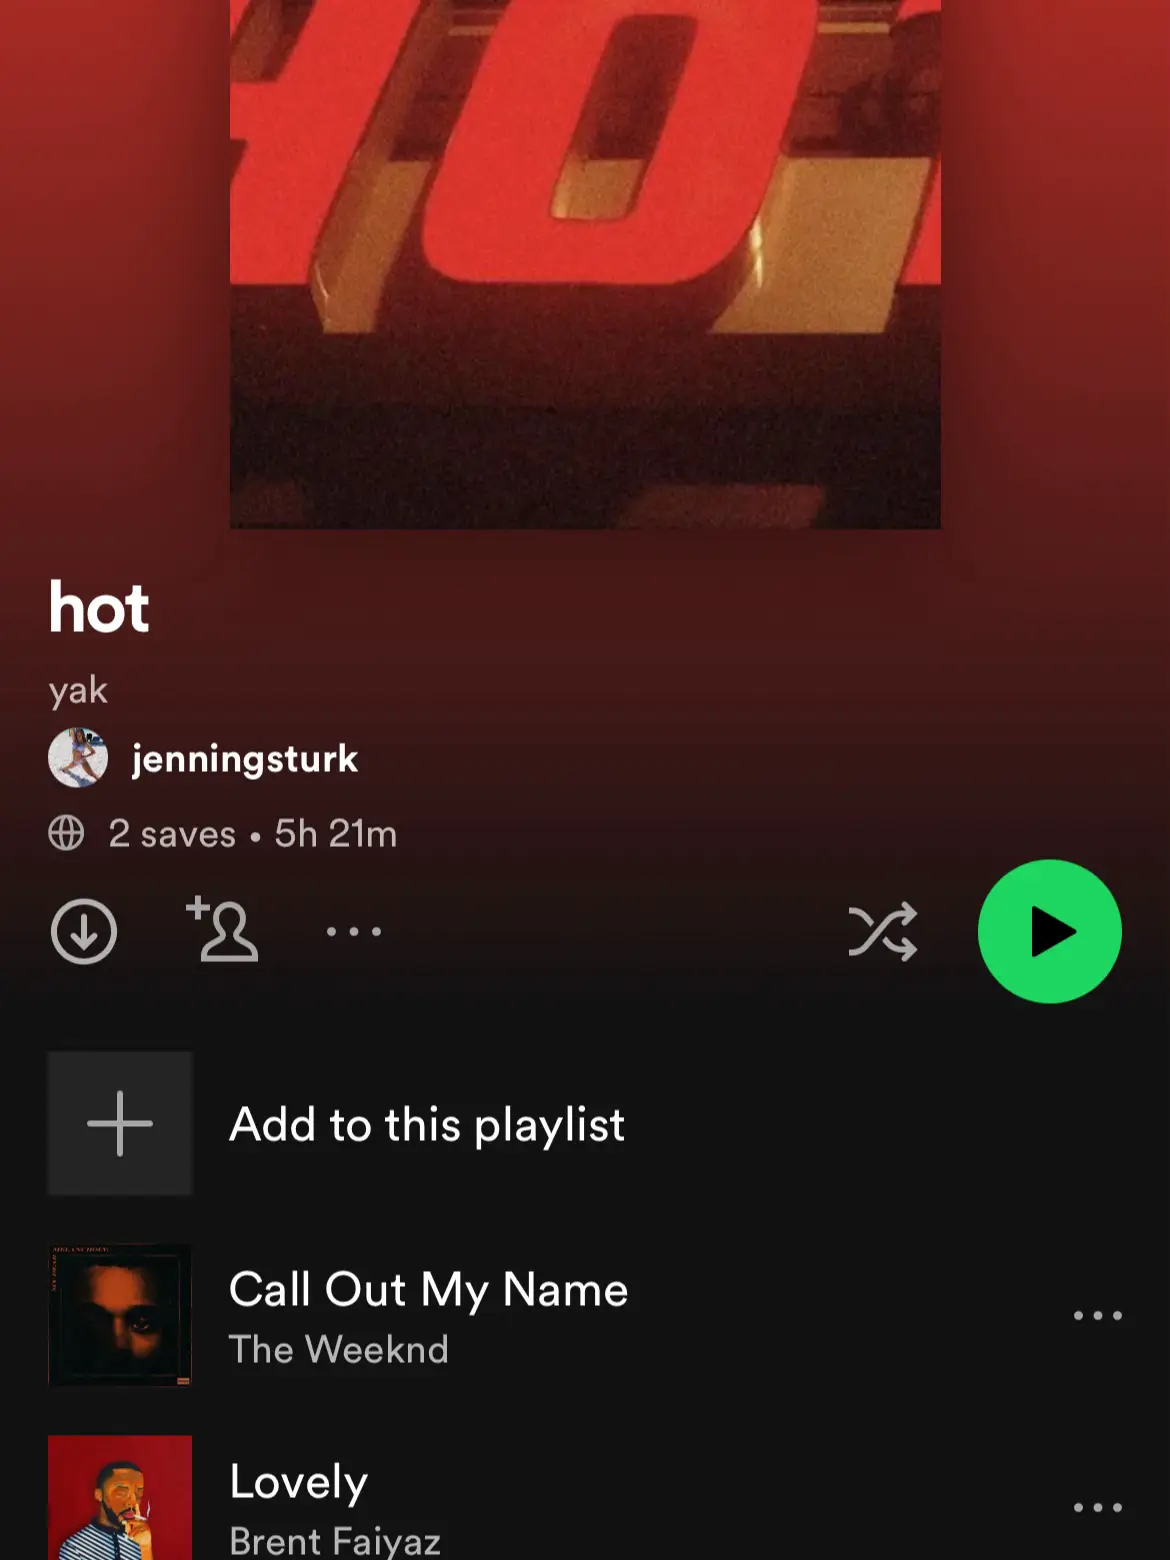  A playlist with the song Call Out My Name by The Weeknd.